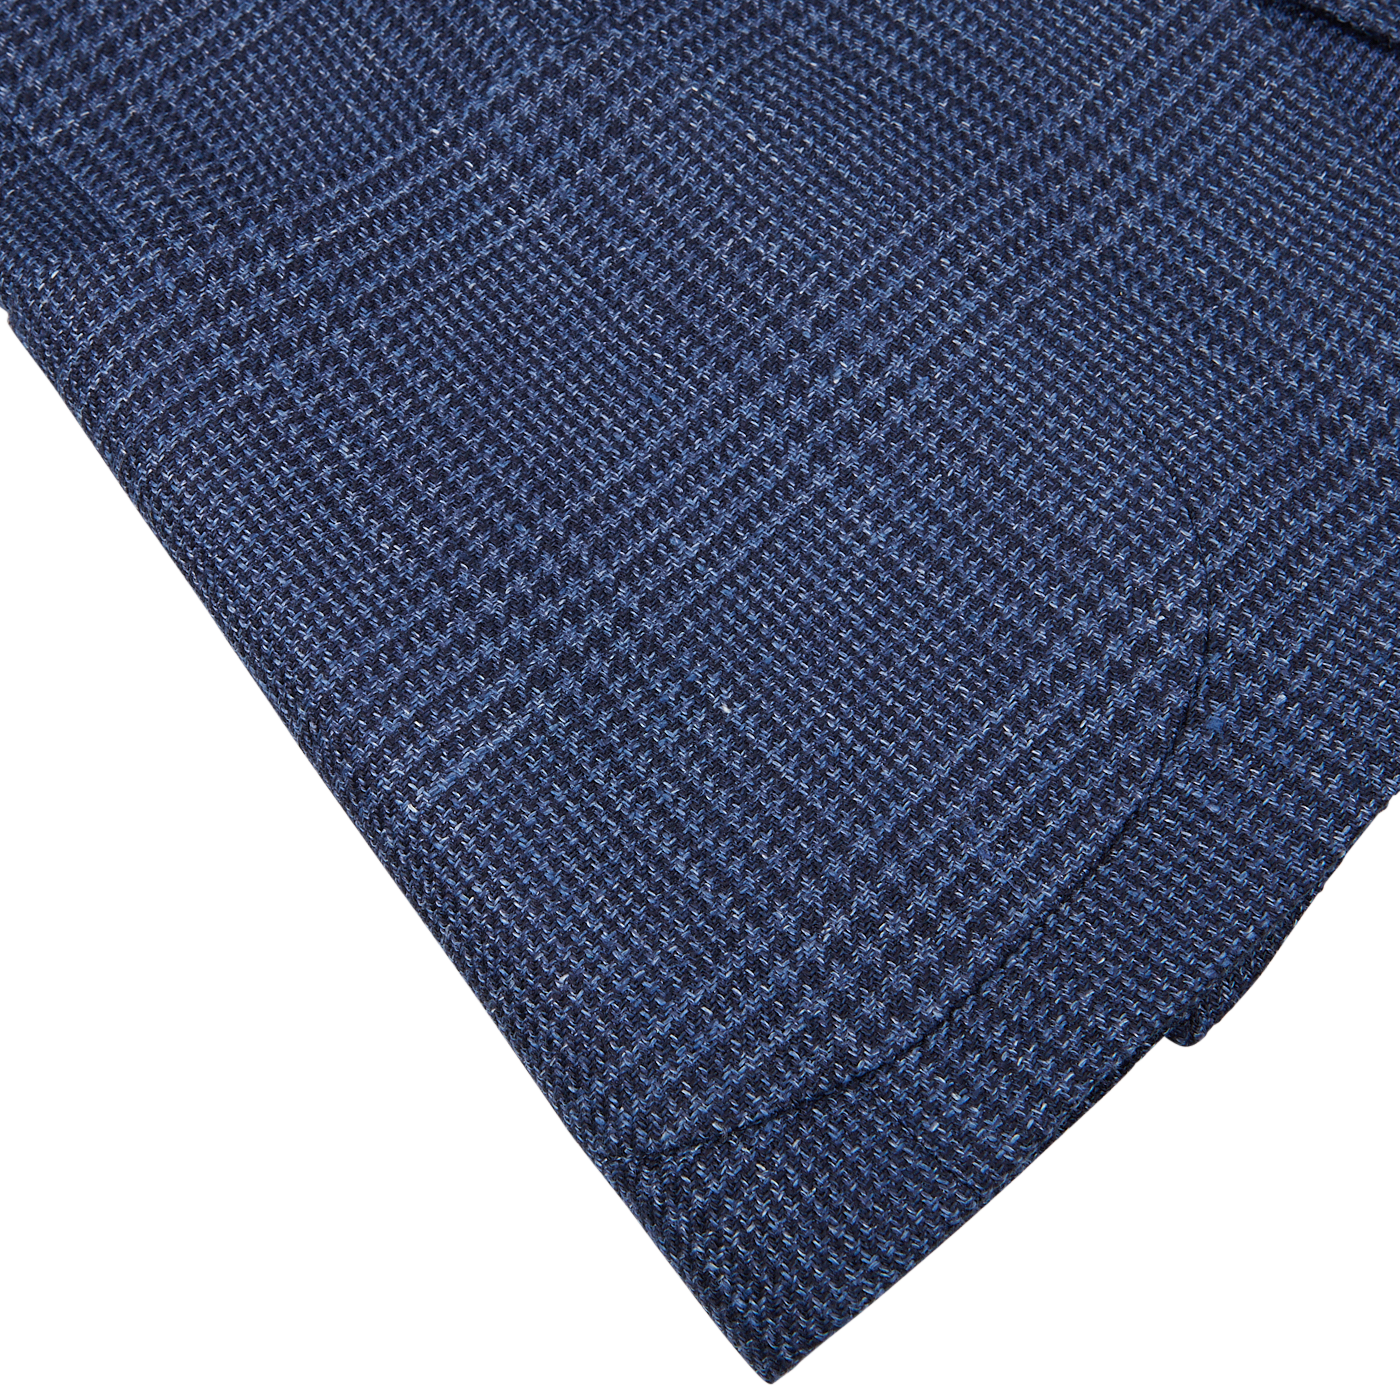 Dark Blue Checked Wool Linen Blazer by Studio 73, made from Italian woven fabric with a herringbone pattern on a white background.